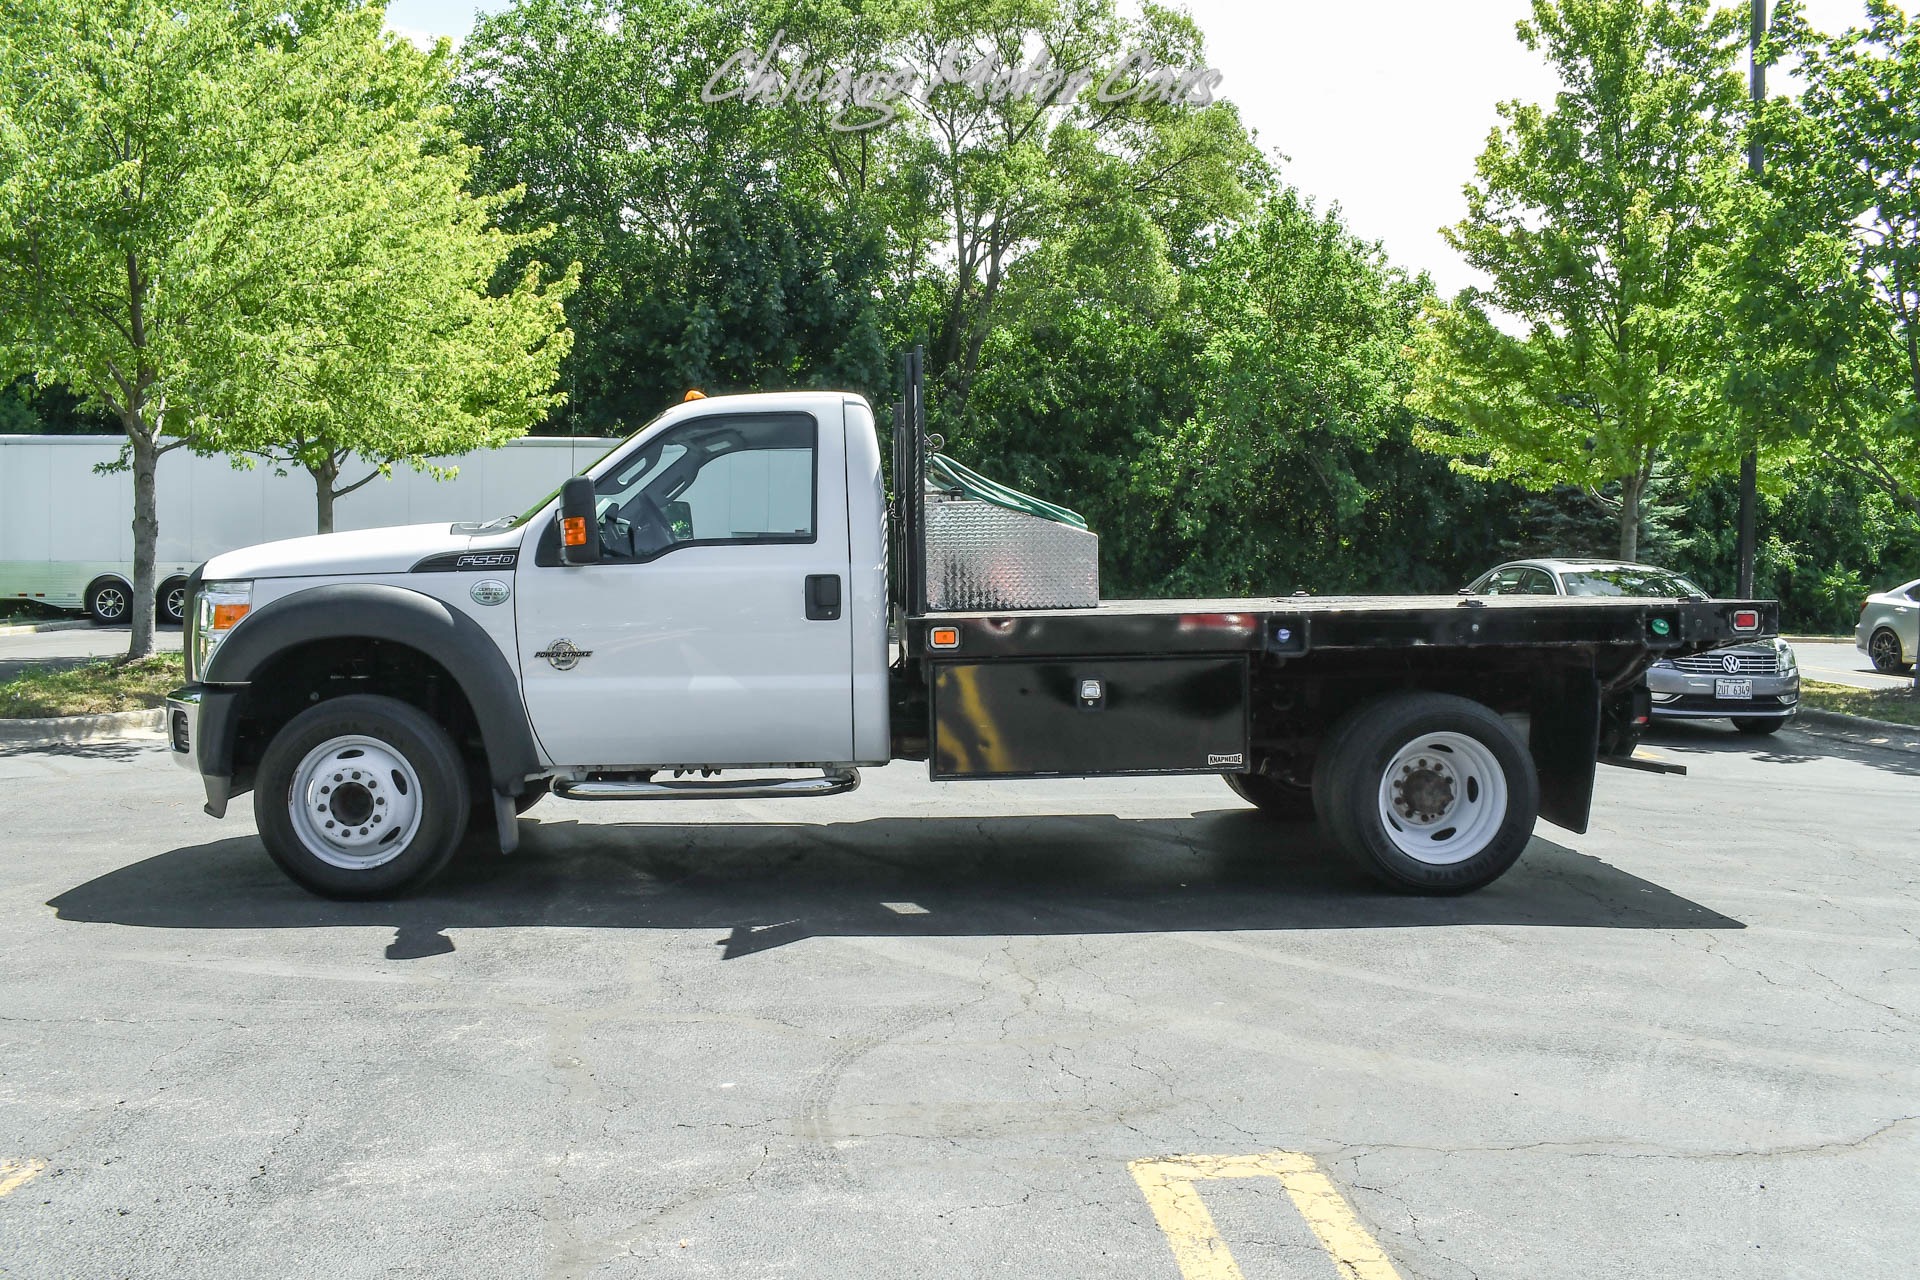 Used-2016-Ford-F550-Super-Duty-Work-Truck-Great-Service-History-Low-Miles